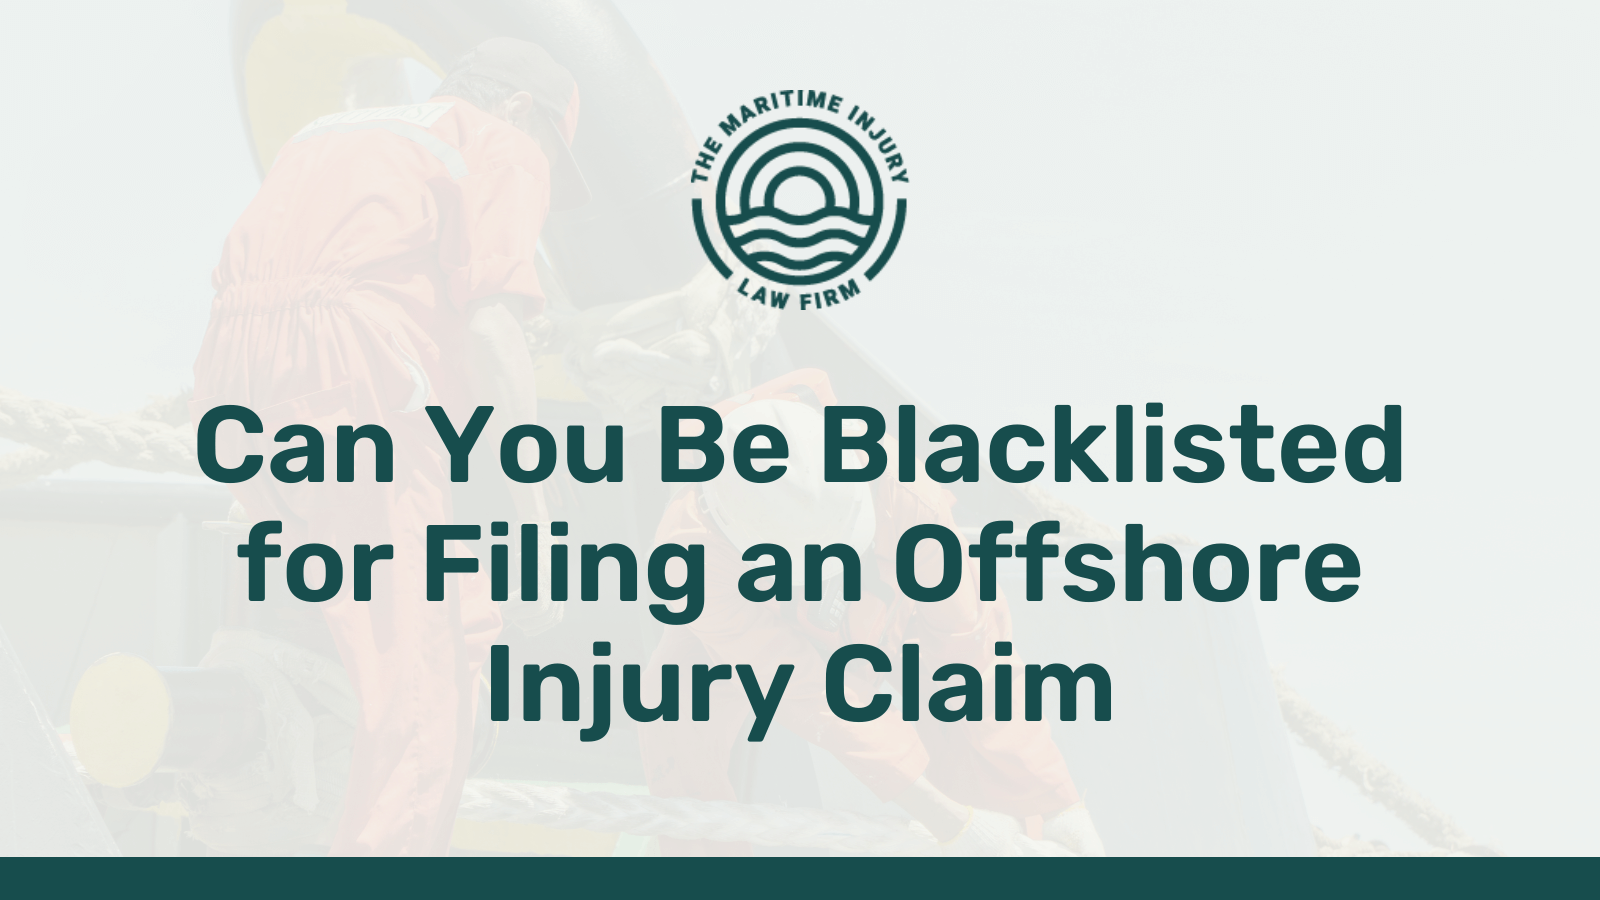 Can You Be Blacklisted for Filing an Offshore Injury Claim - maritime injury law firm - George Vourvoulias